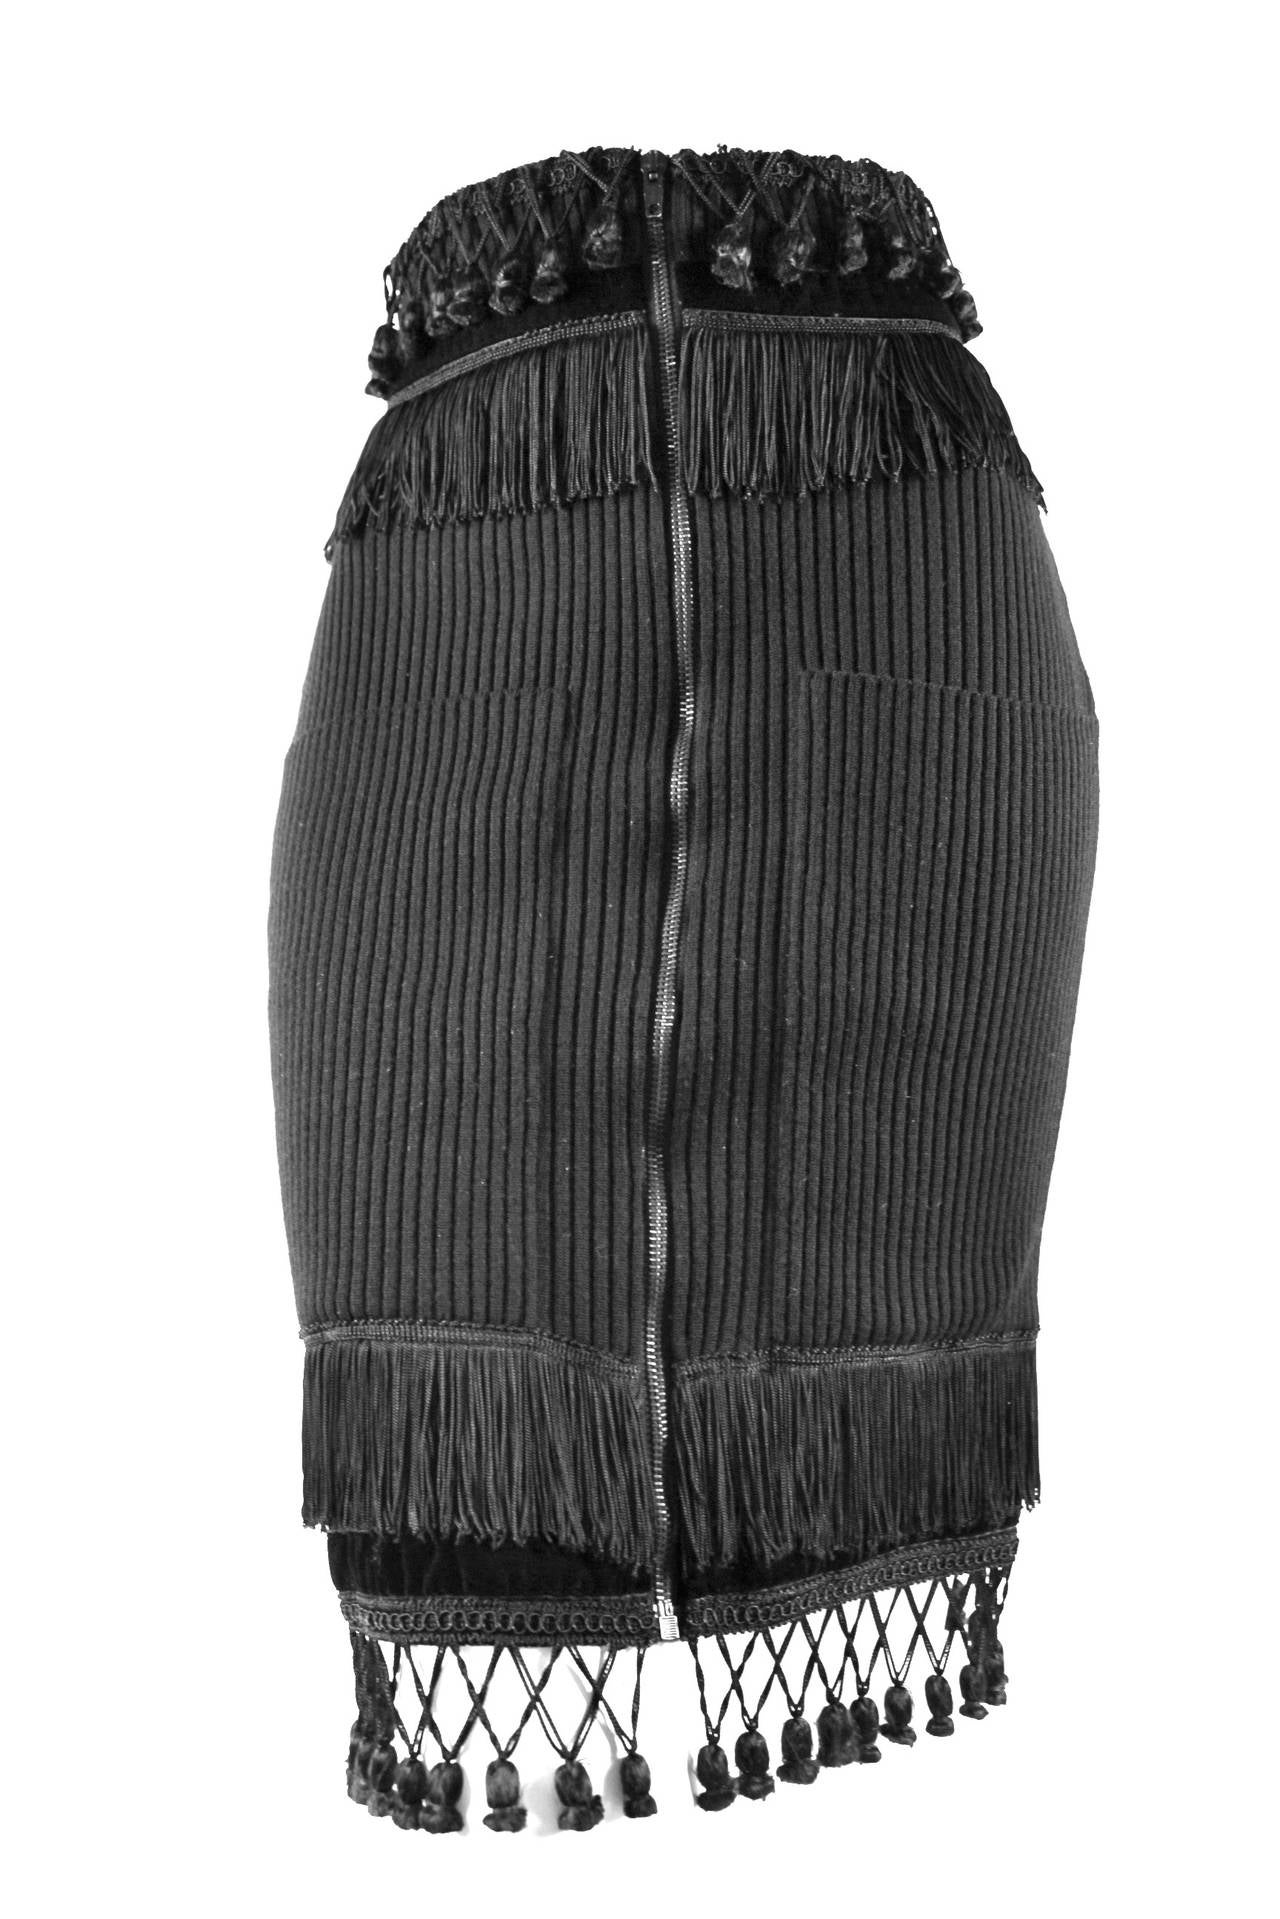 1980s Jean Paul Gaultier for Equator Skirt

Ribbed skirt with decorative fringe and tassels
Excellent condition 

Labelled size 40
Missing the Equator label but still contains Fuzzi label